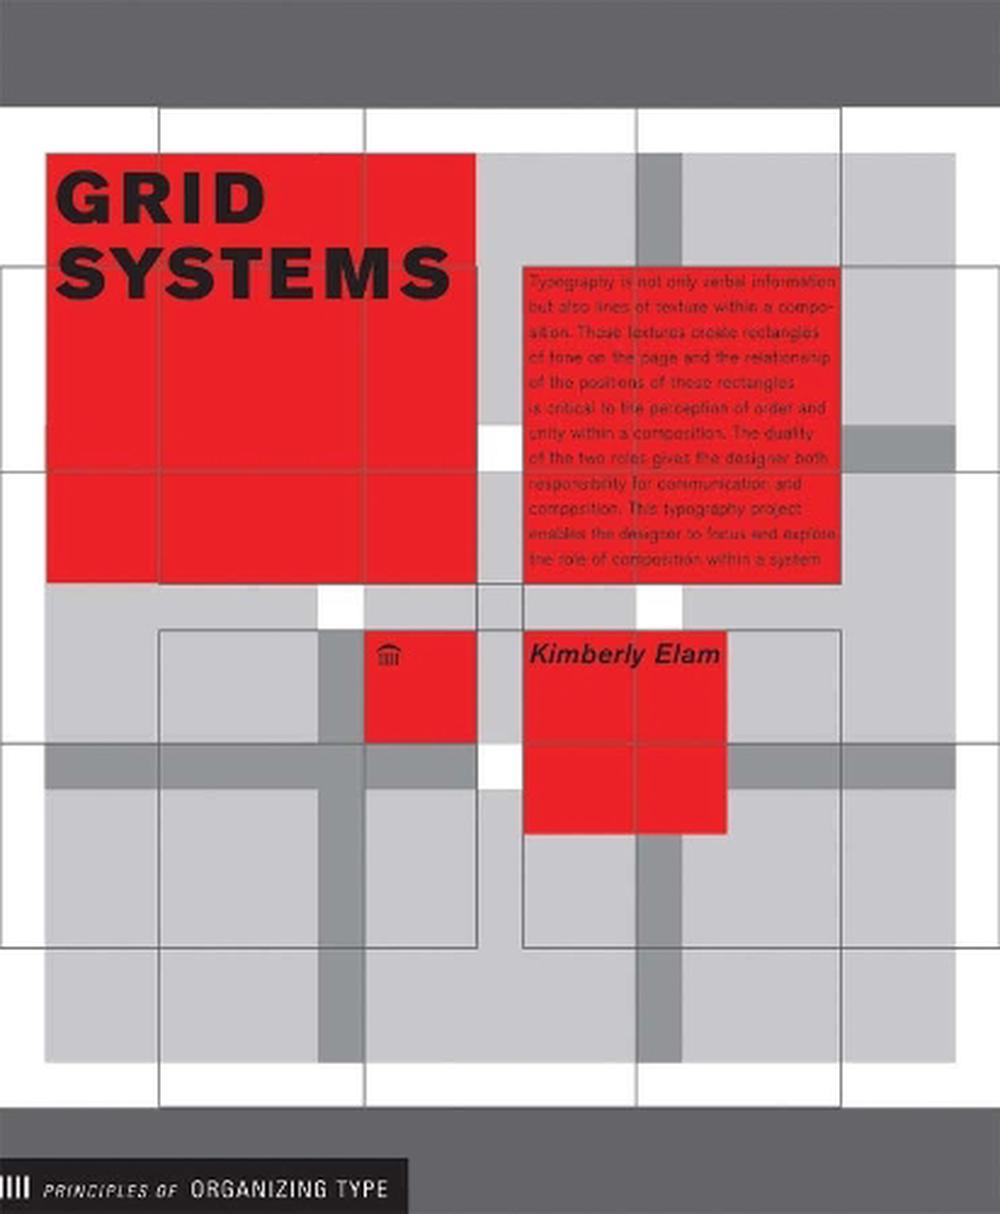 grid systems principles of organizing type